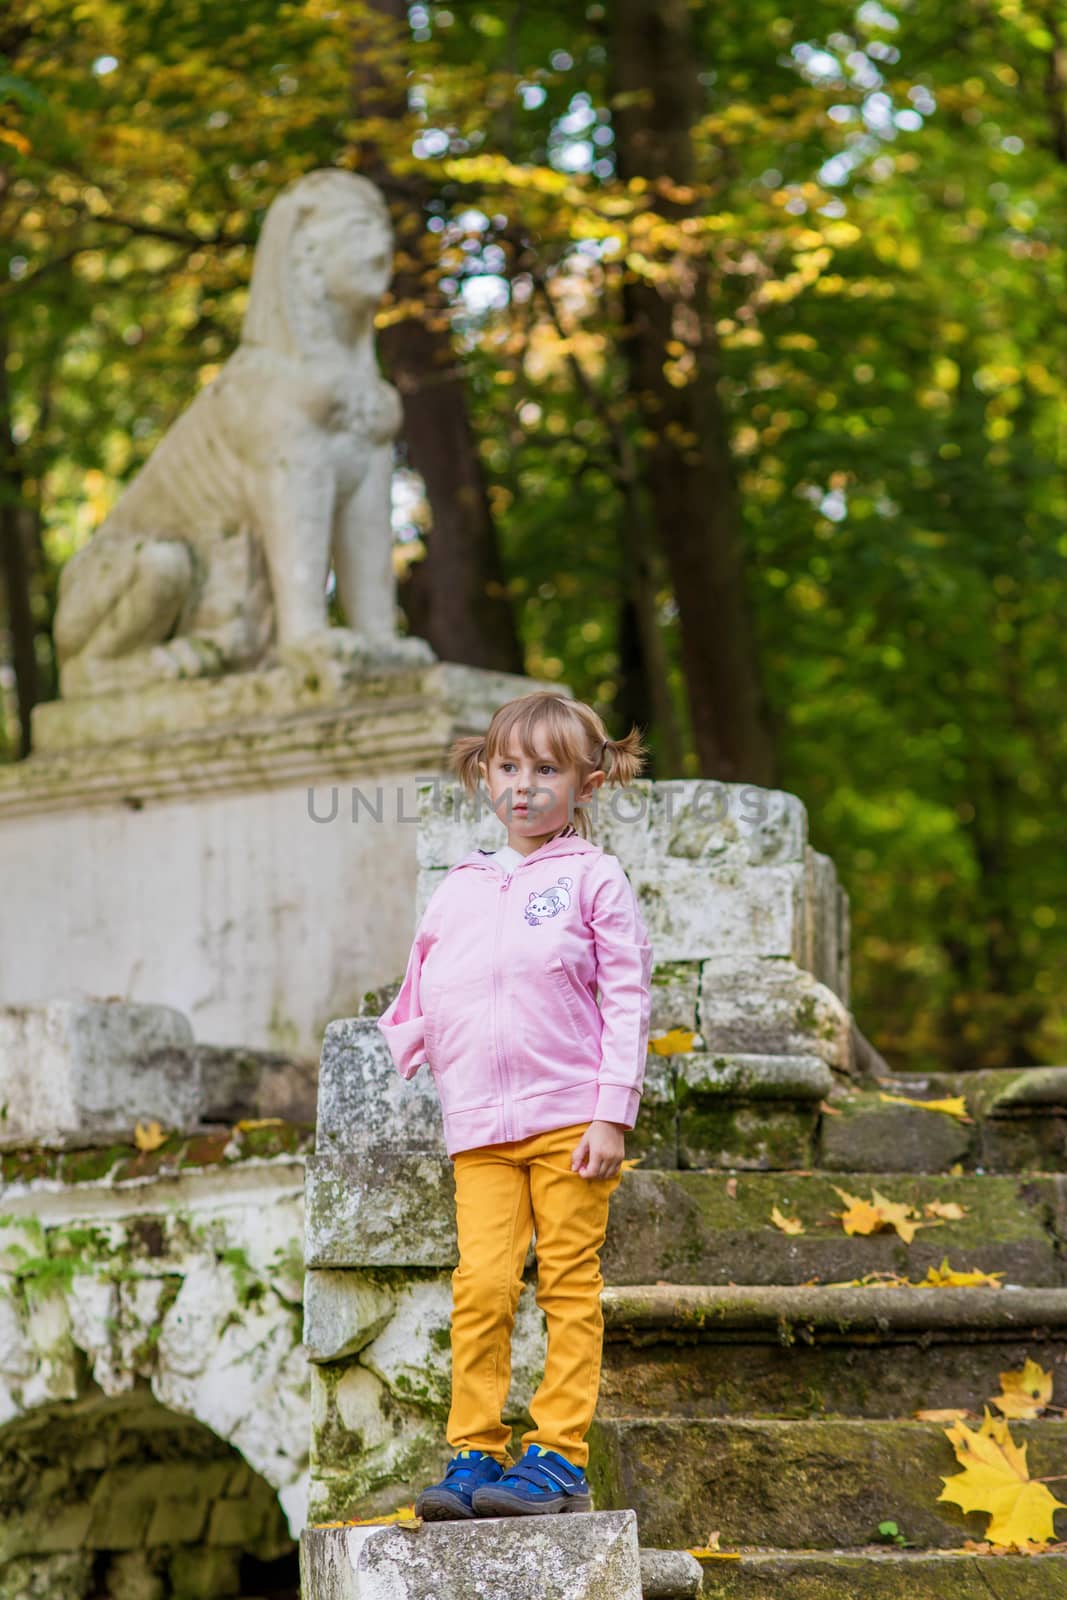 A girl with a broken arm stands on the stairs in an old park on an autumn walk